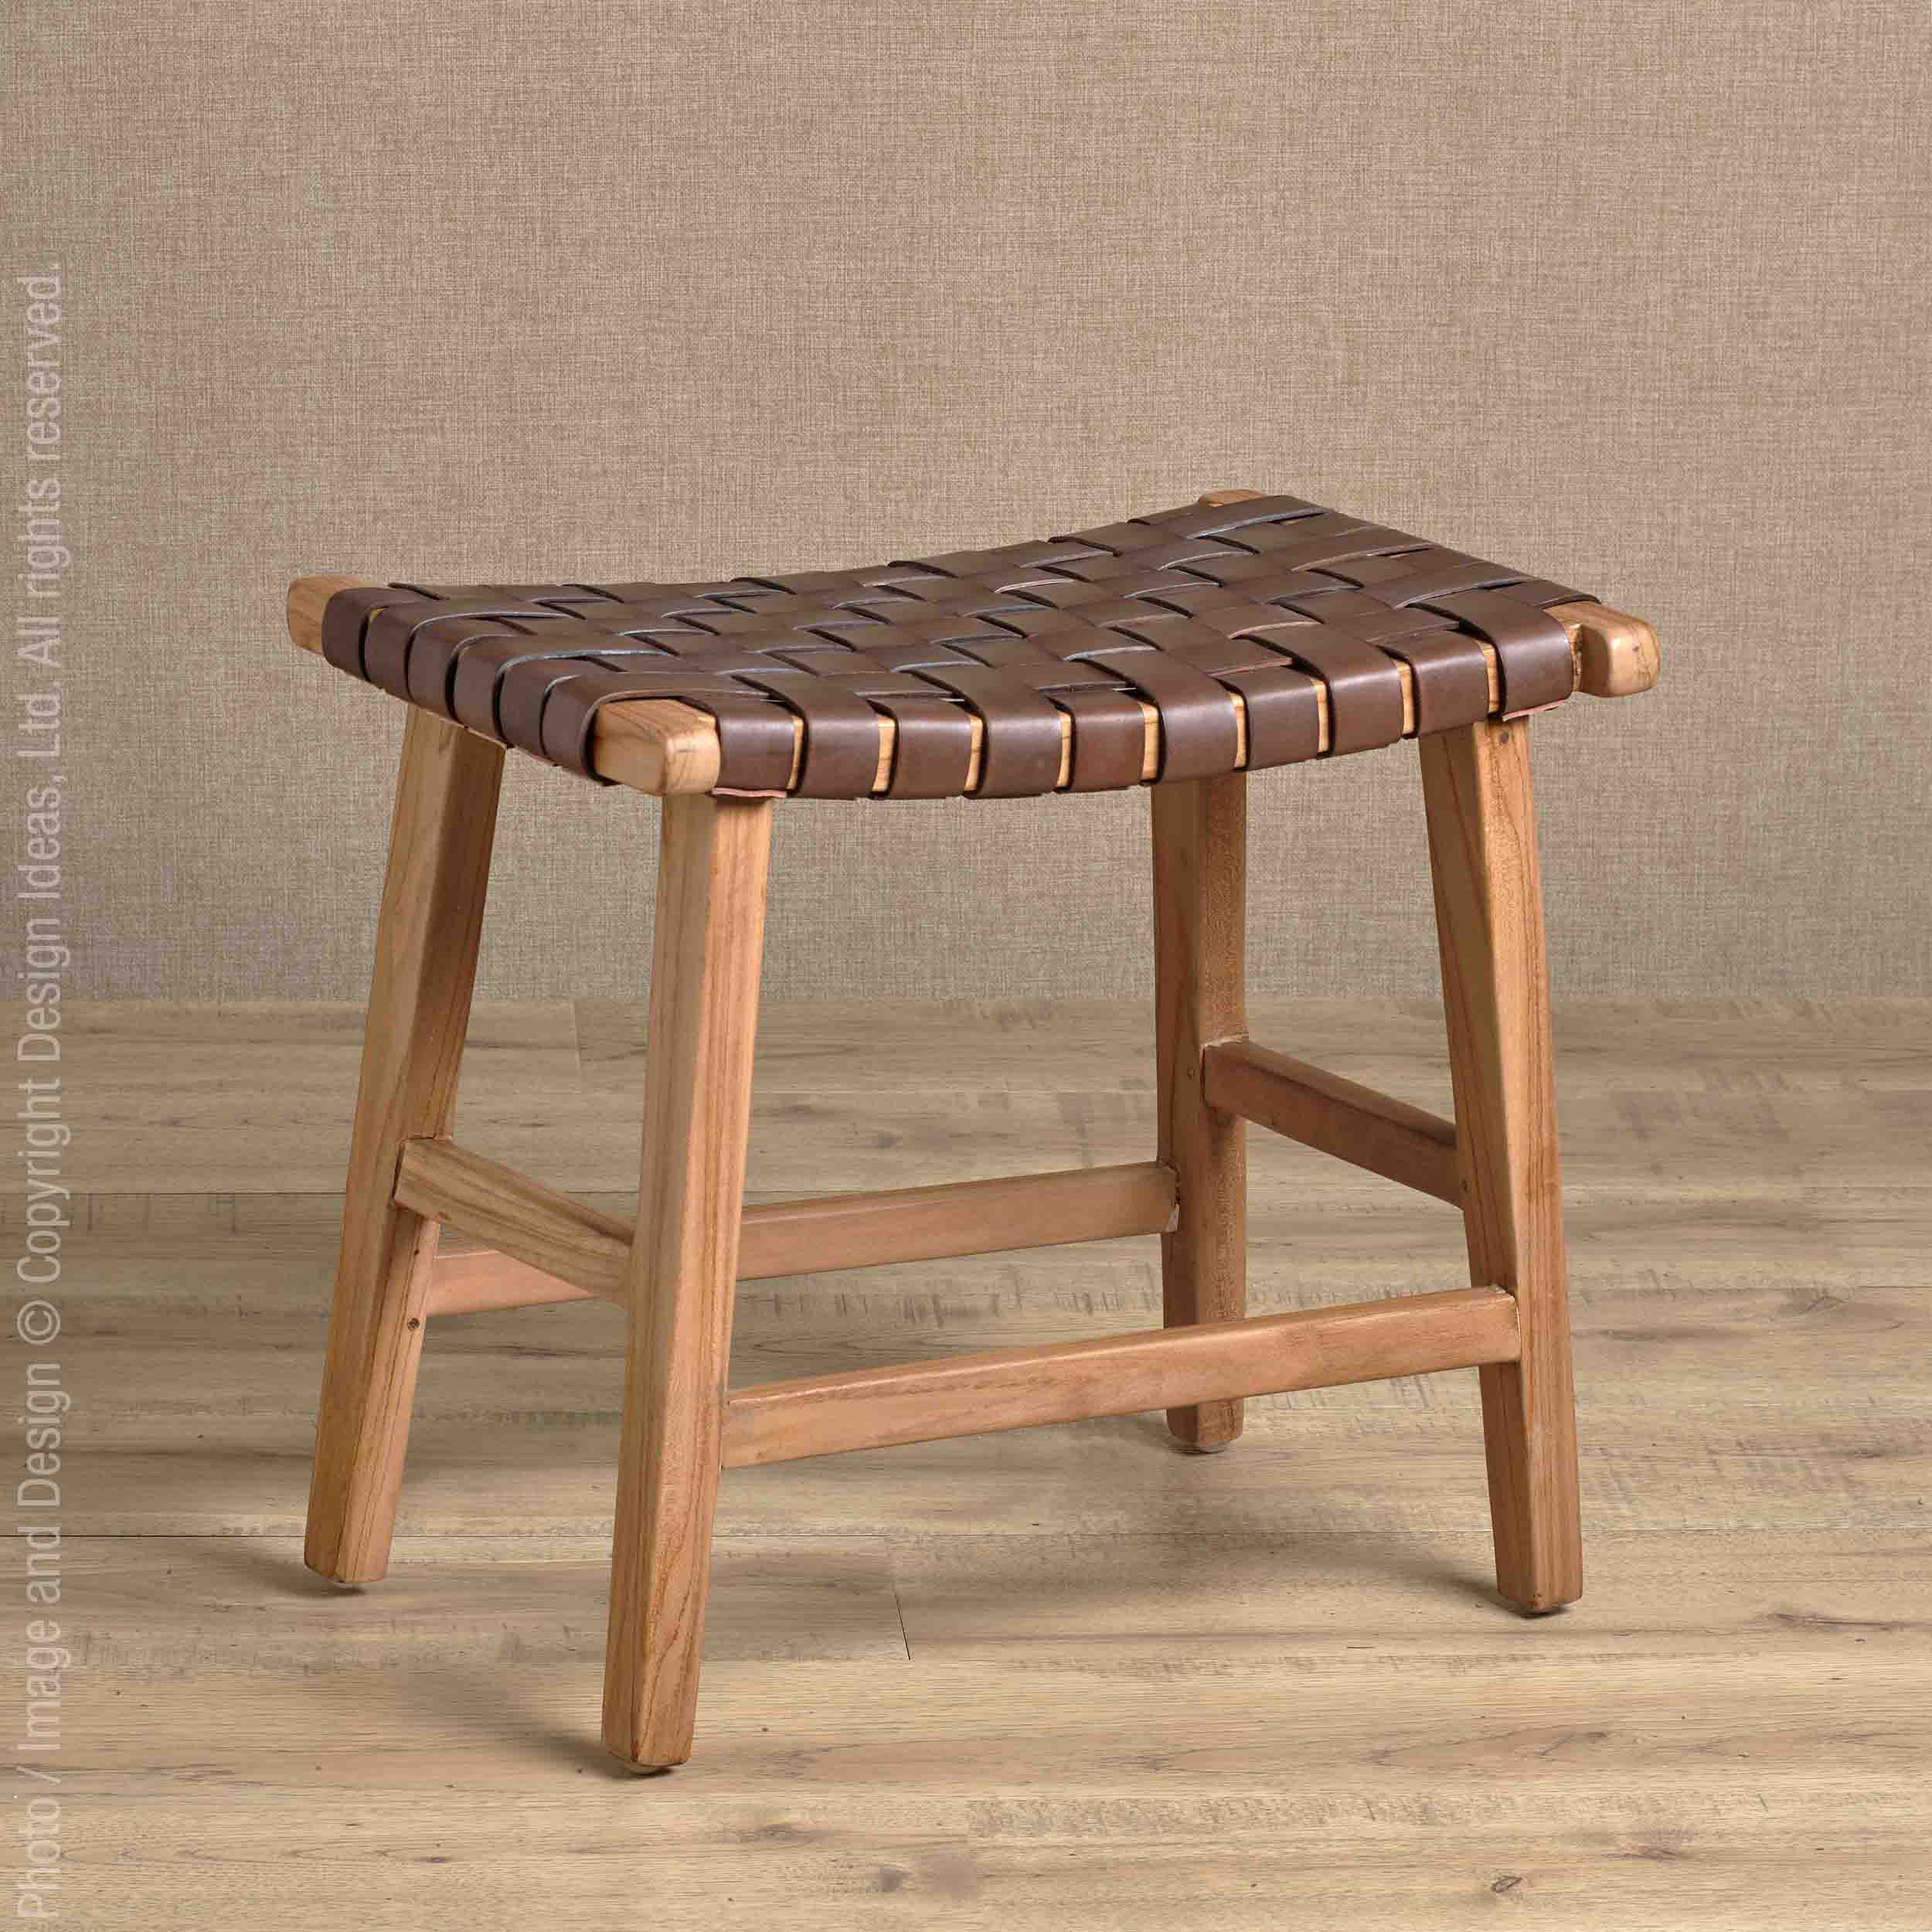 Visby™ Teak/Woven Leather Stool